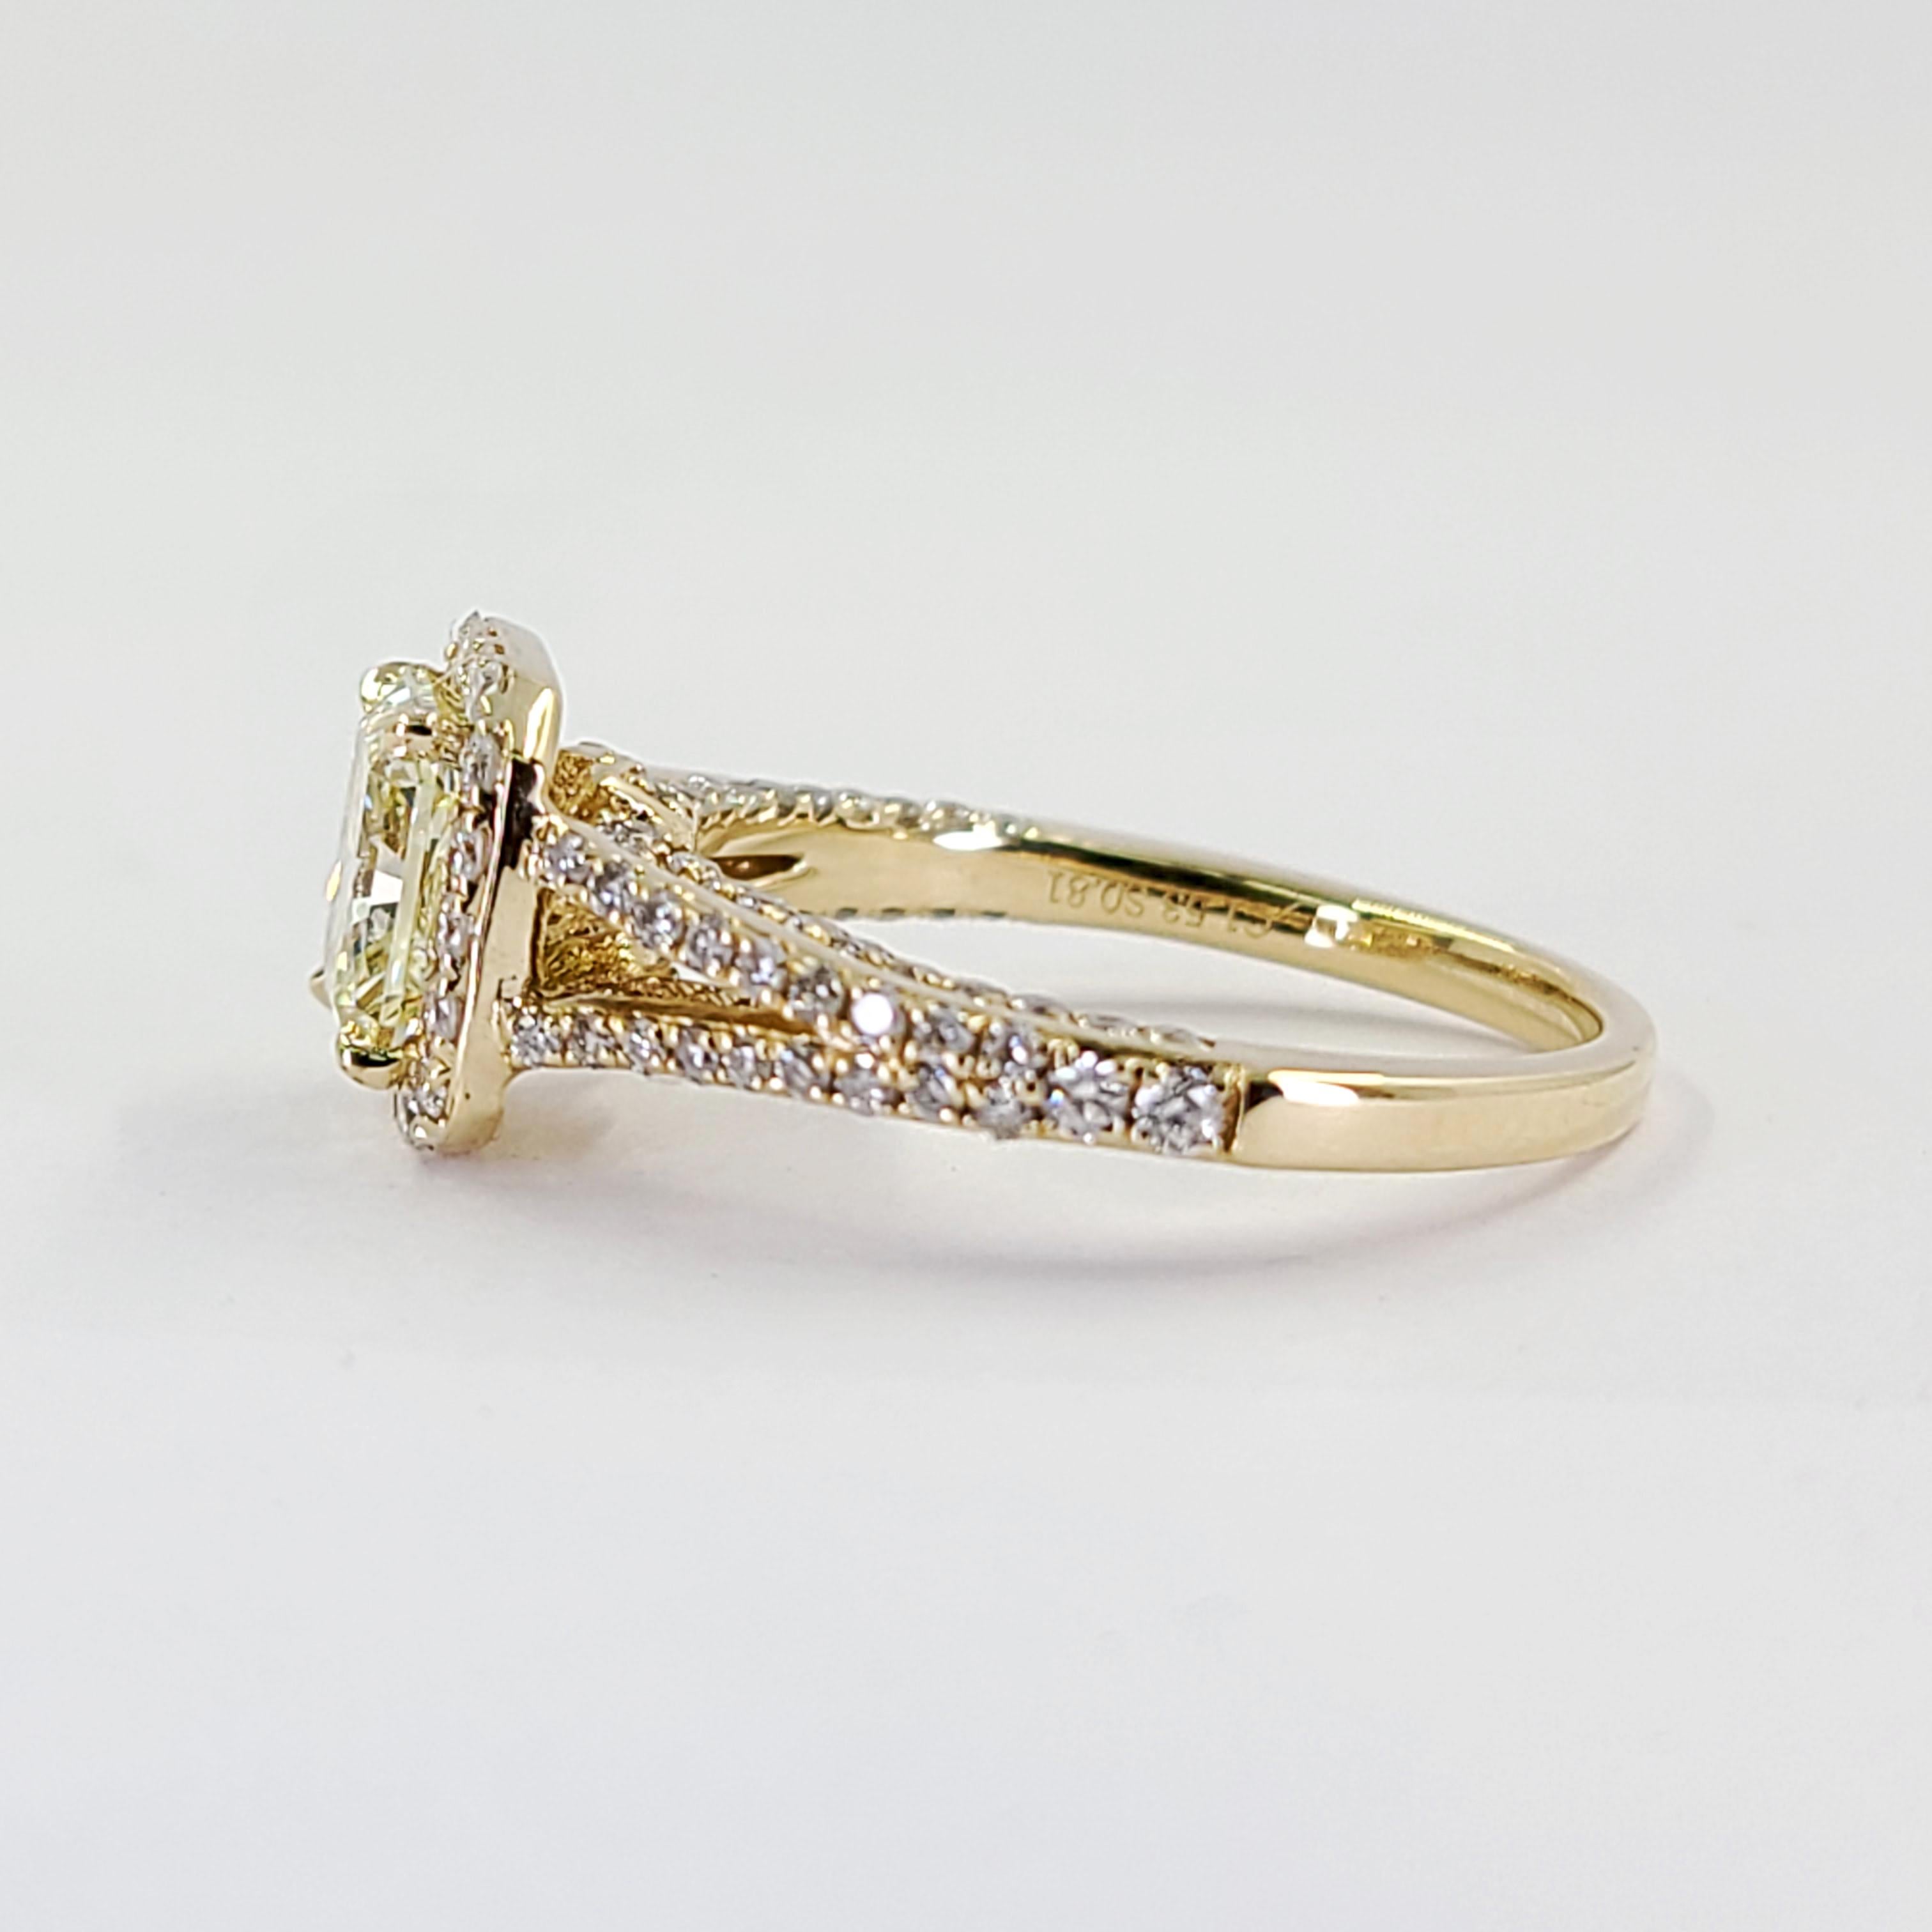 14 Karat Yellow Gold Ring Featuring A 1.53 Carat Radiant Cut Diamond EGL Graded (Report #68357802D) As Fancy Light Yellow Color & SI1 Clarity Accented By 108 Round Brilliant Cut Diamonds Of VS Clarity & H Color Totaling An Additional 0.81 Carats.